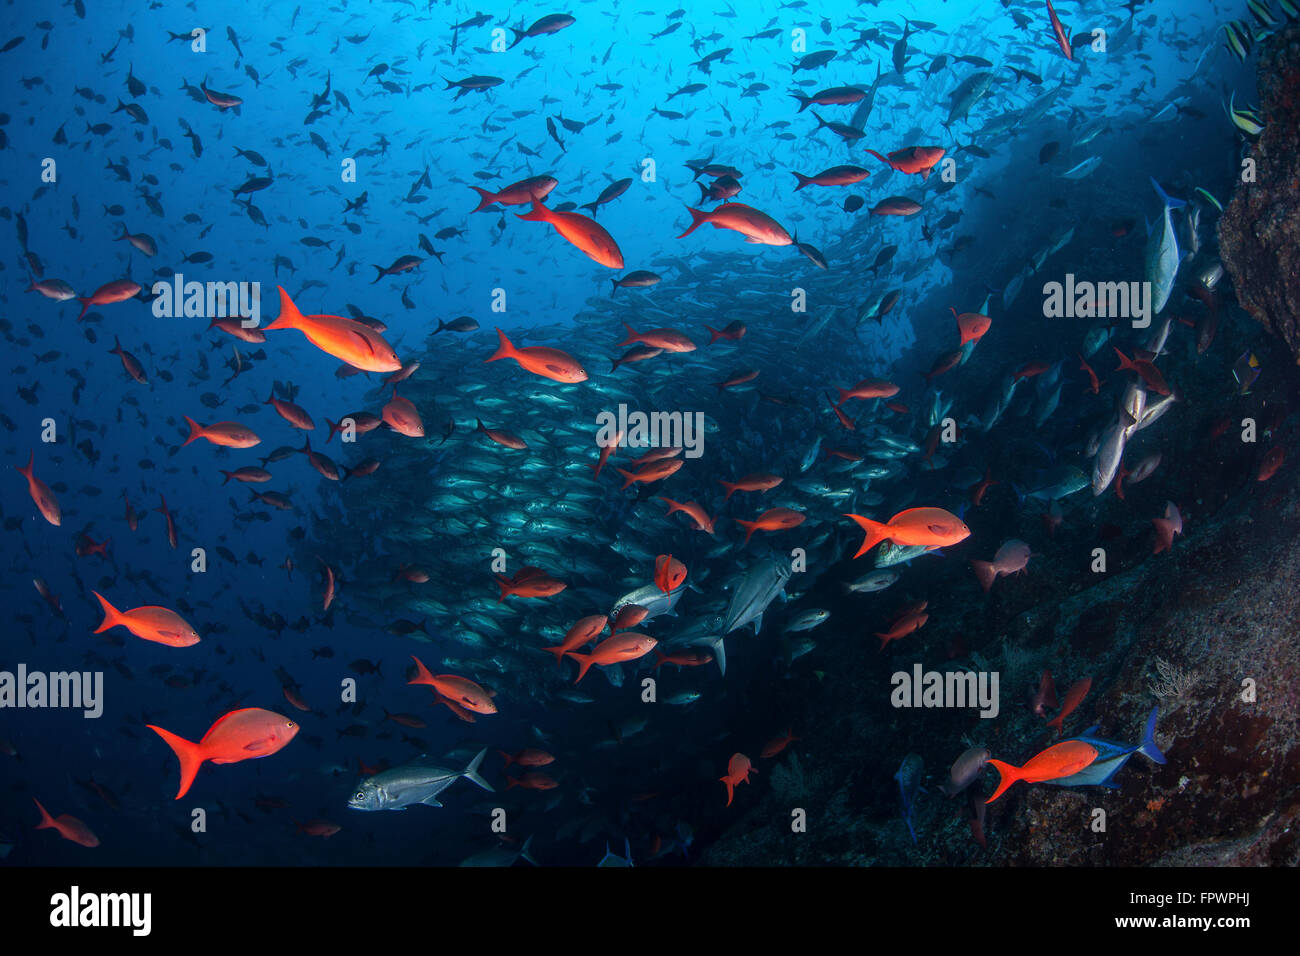 Colorful Pacific creolefish (Paranthias colonus) swim over a rocky reef in deep water near Cocos Island, Costa Rica. This remote Stock Photo